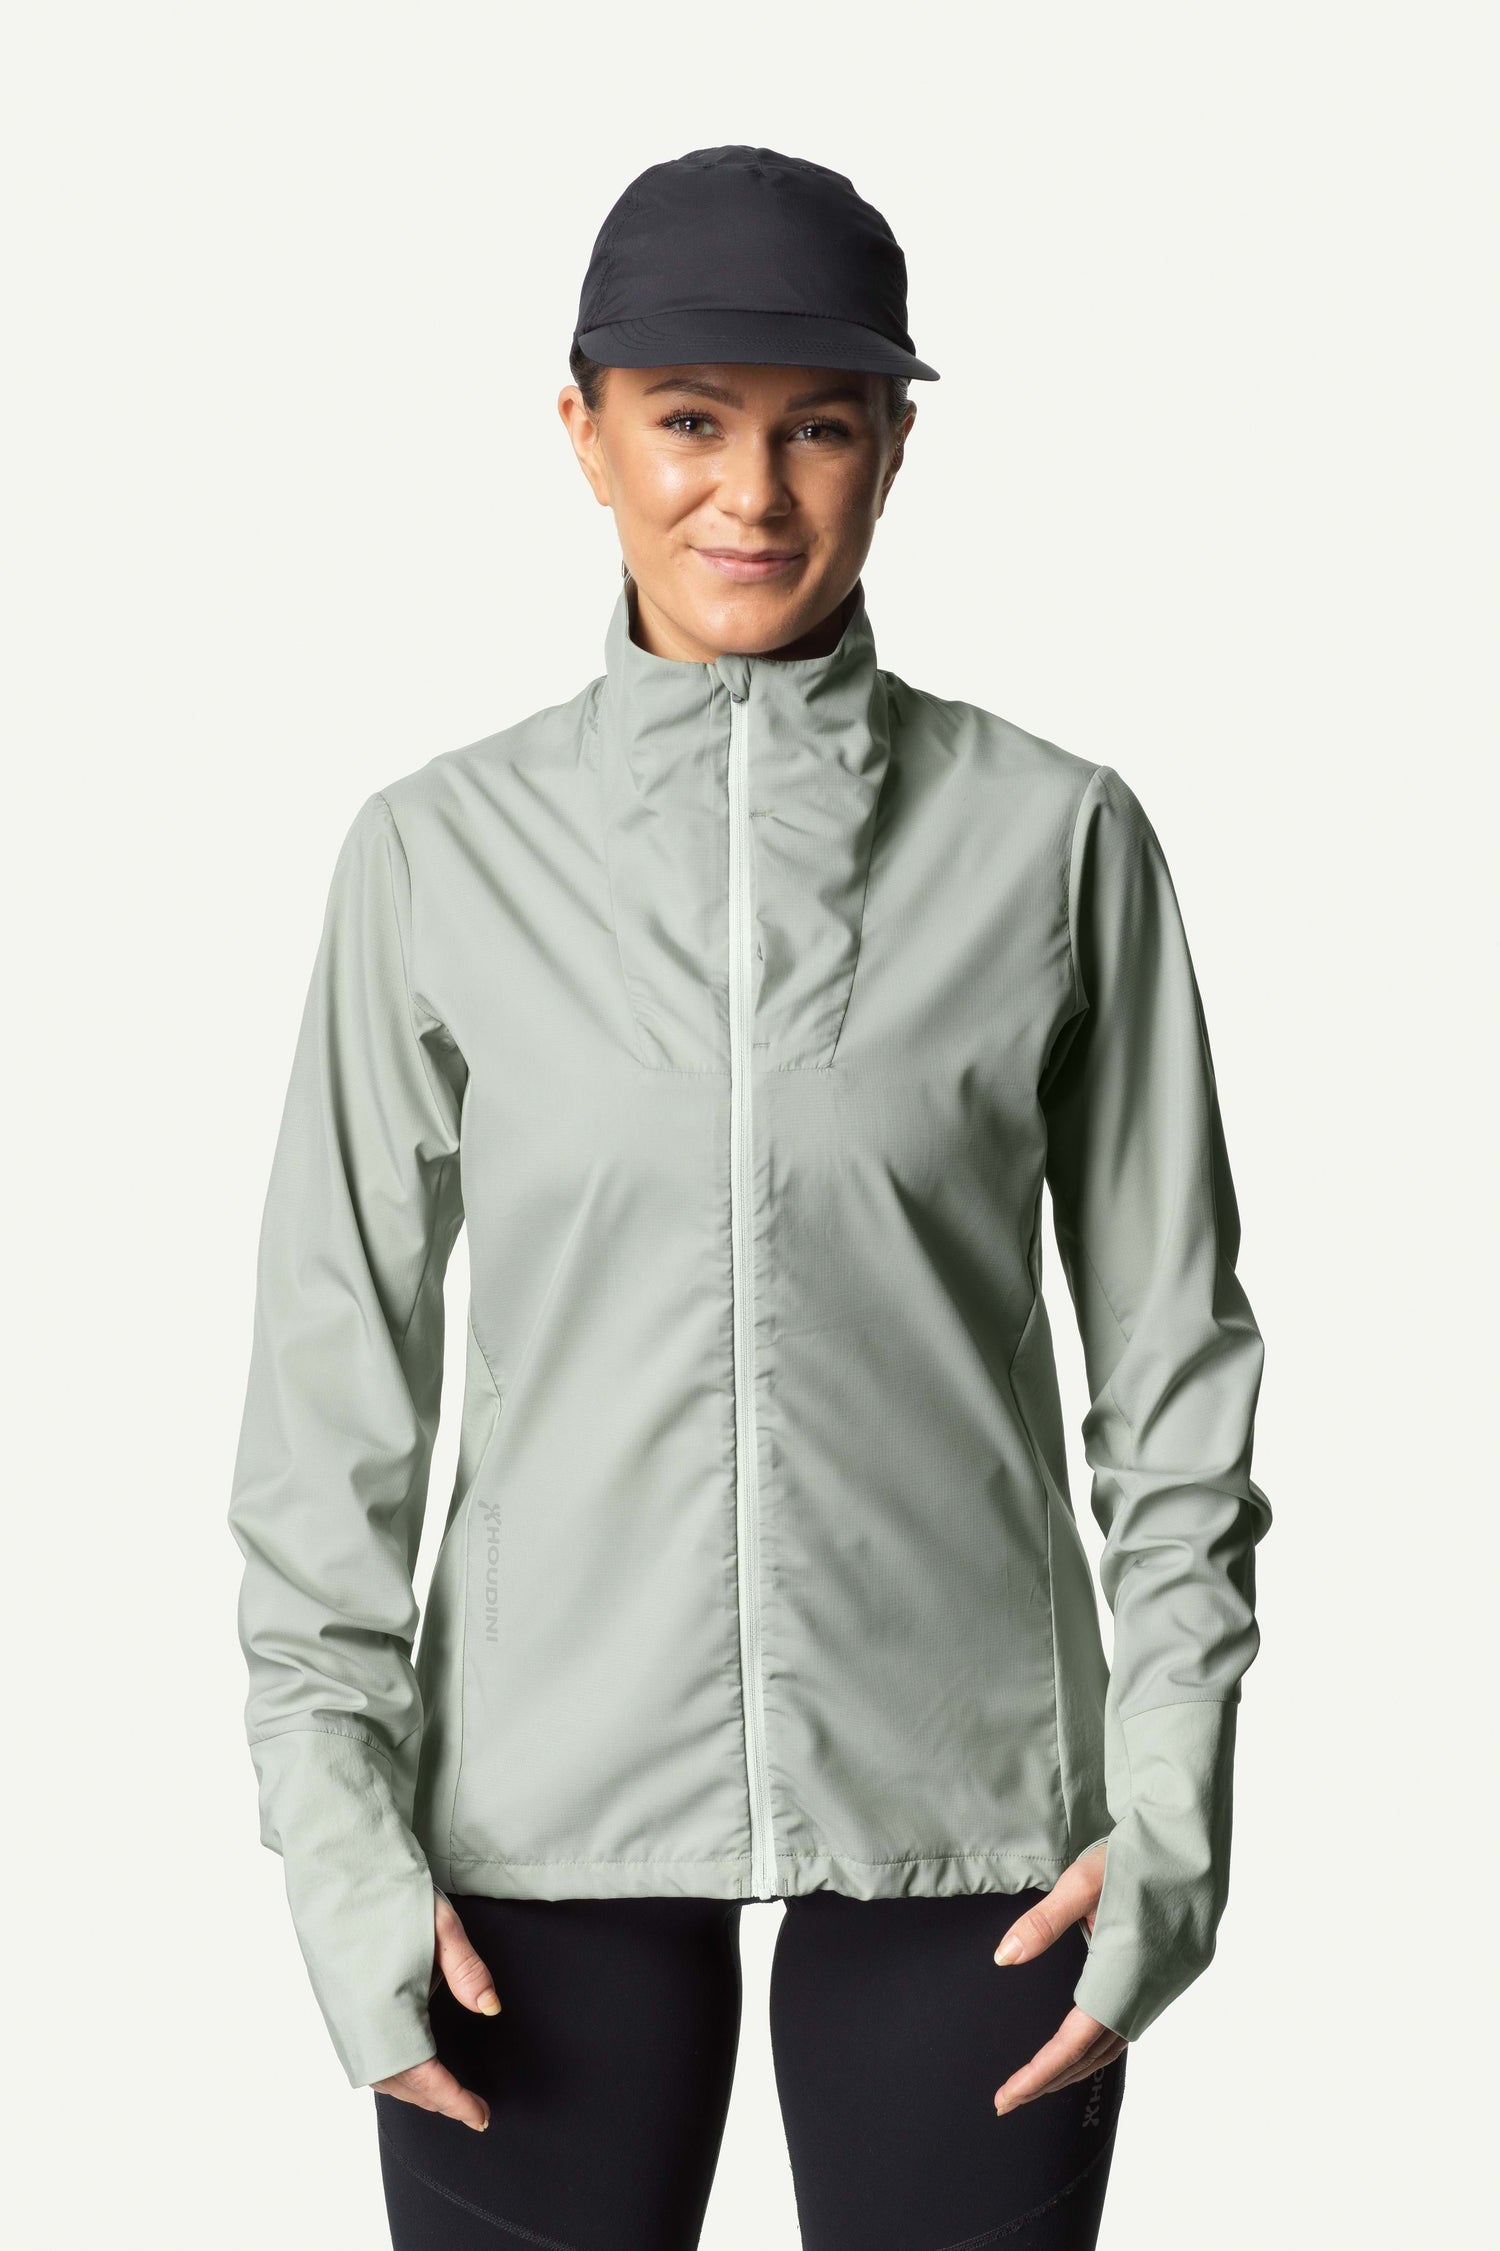 Houdini - W's Pace Wind Jacket - 100% recycled polyester - Weekendbee - sustainable sportswear